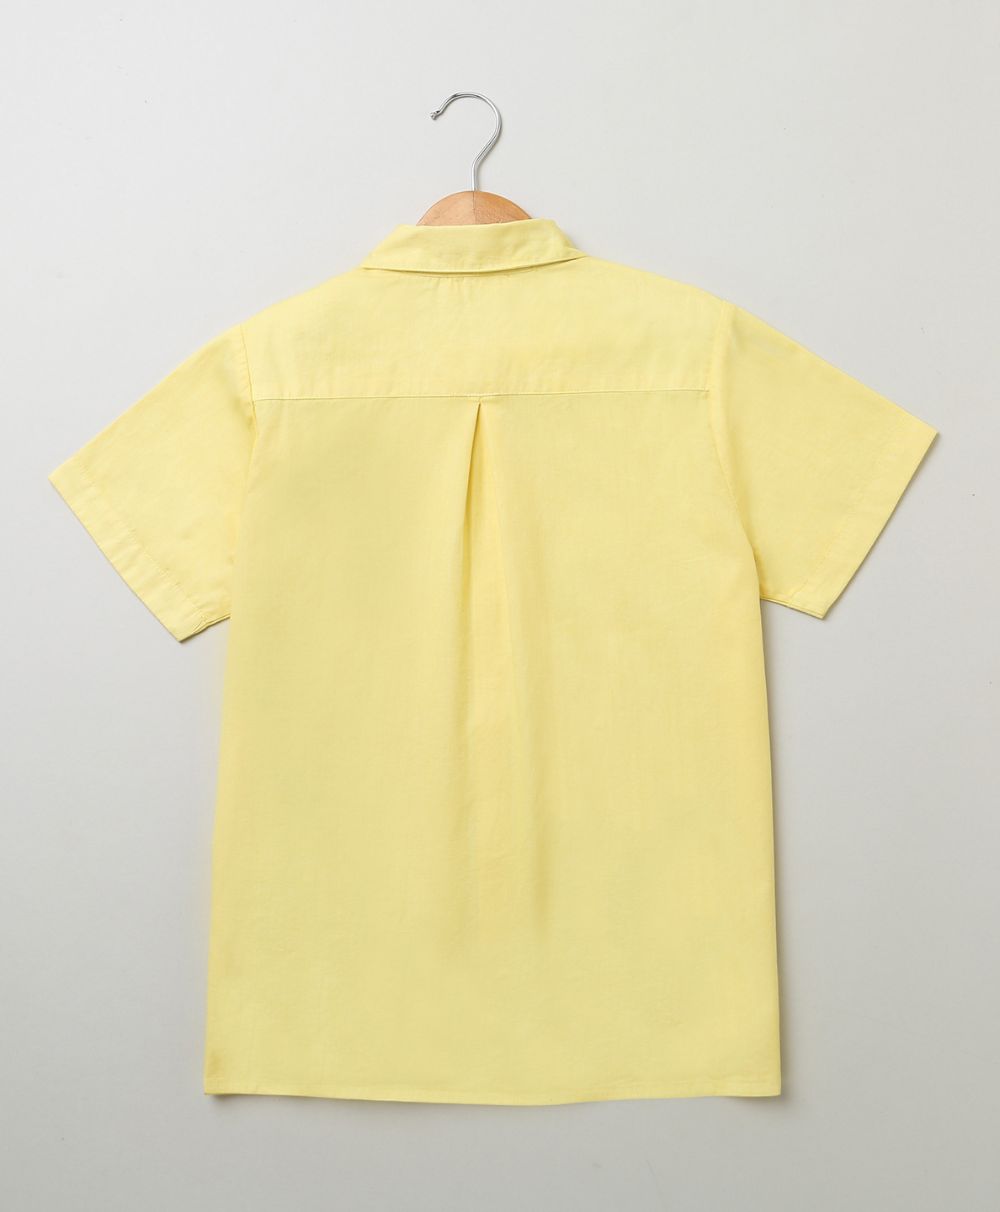 Embroidered Yellow Shirt